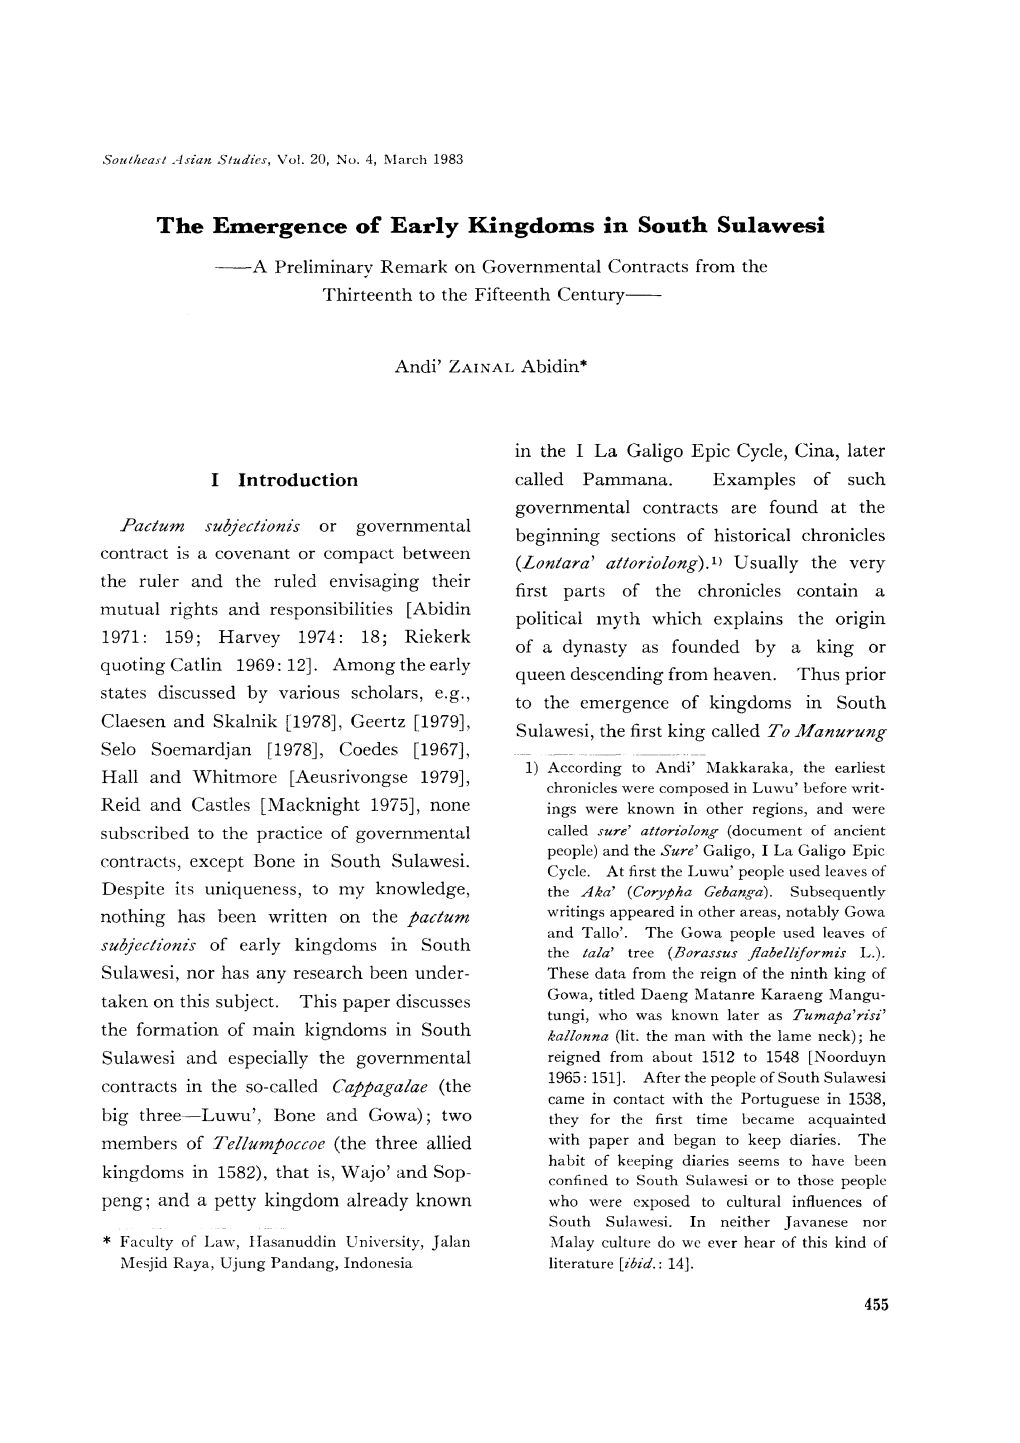 The Edlergence of Early Kingdodls in South Sulawesi